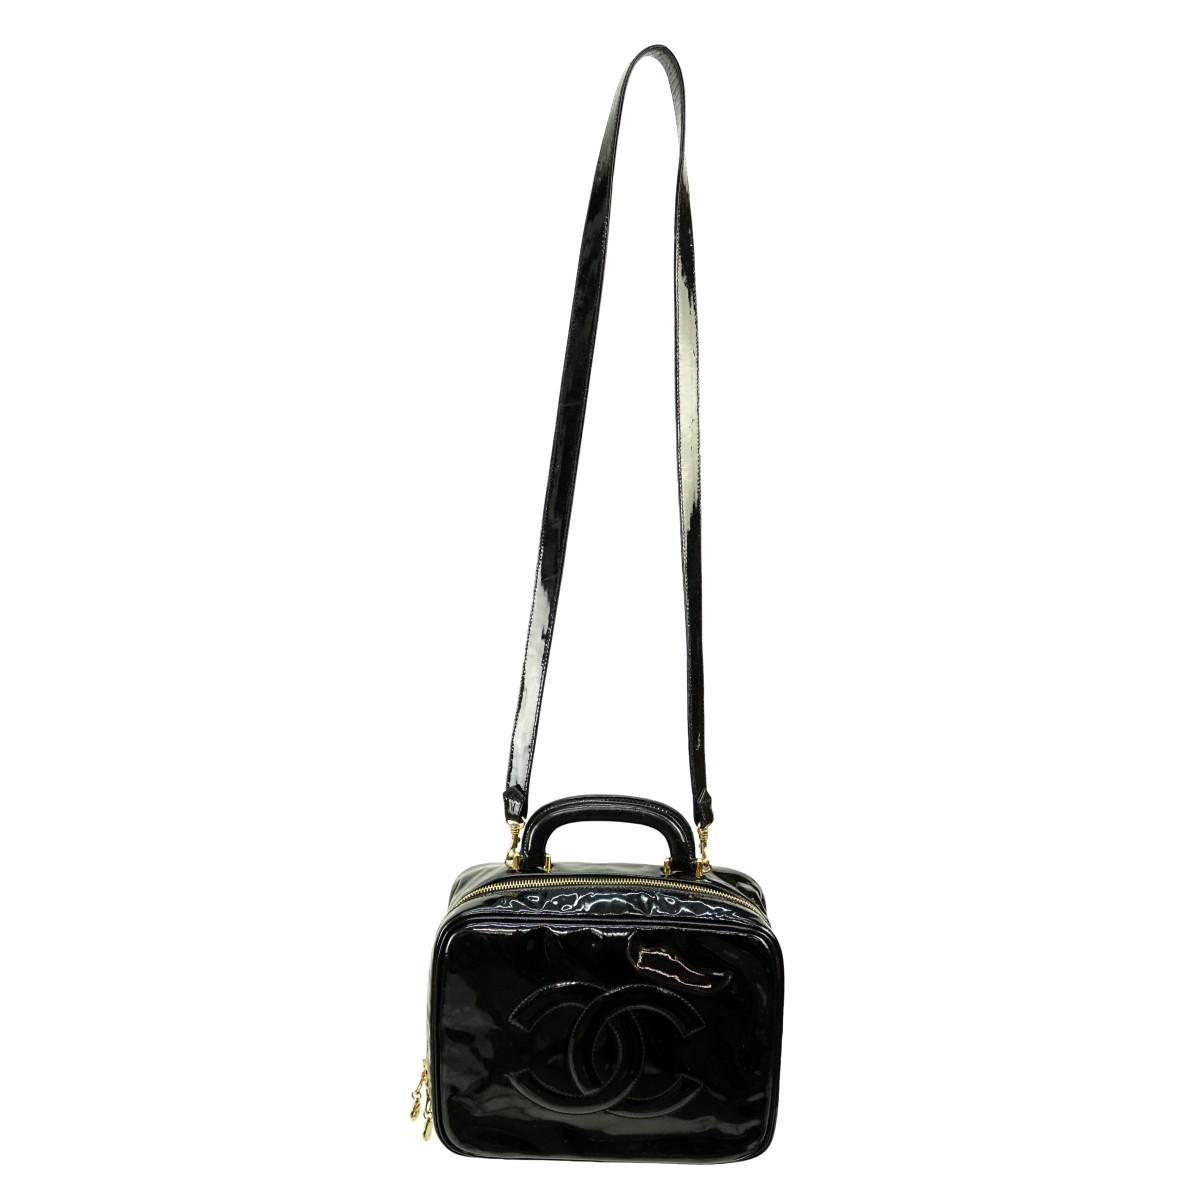 Chanel Black Patent Leather Cosmetic Shoulder Bag